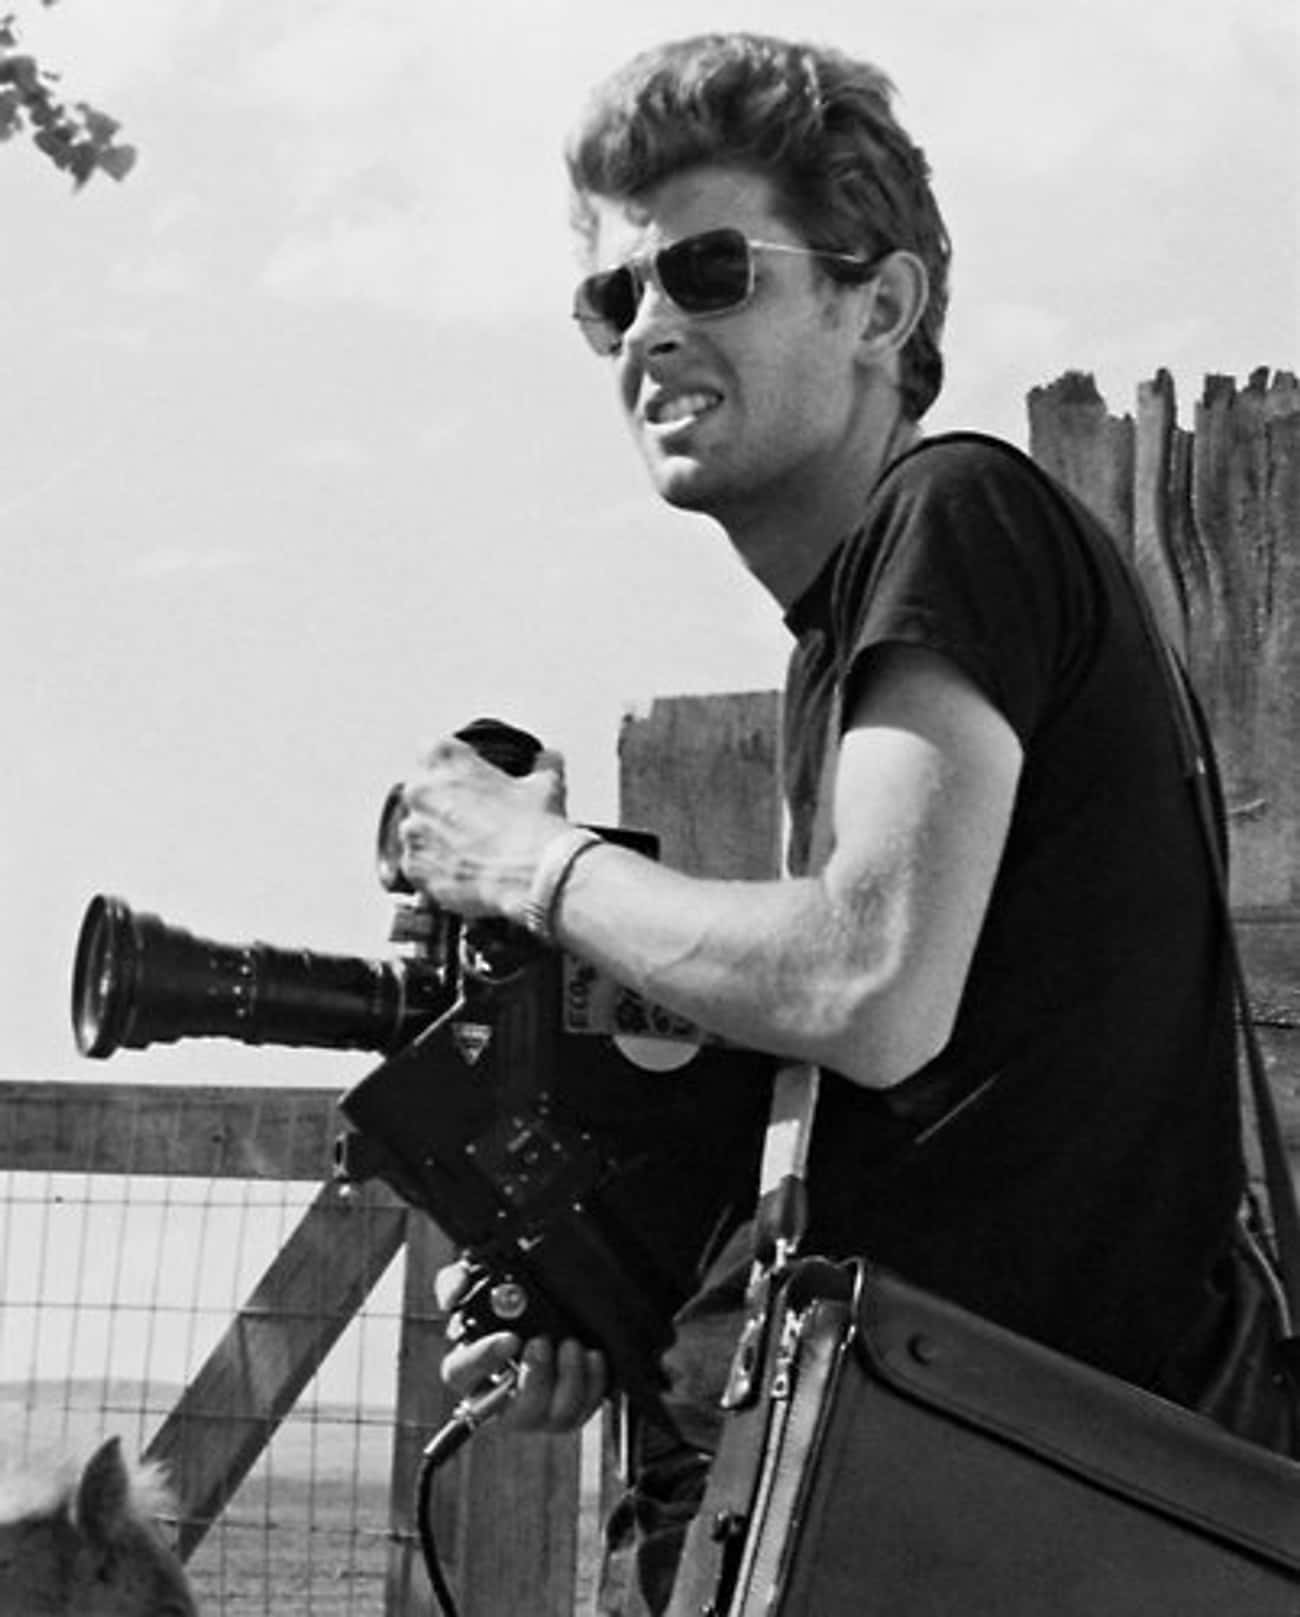 Young George Lucas in Black T-Shirt with Camera